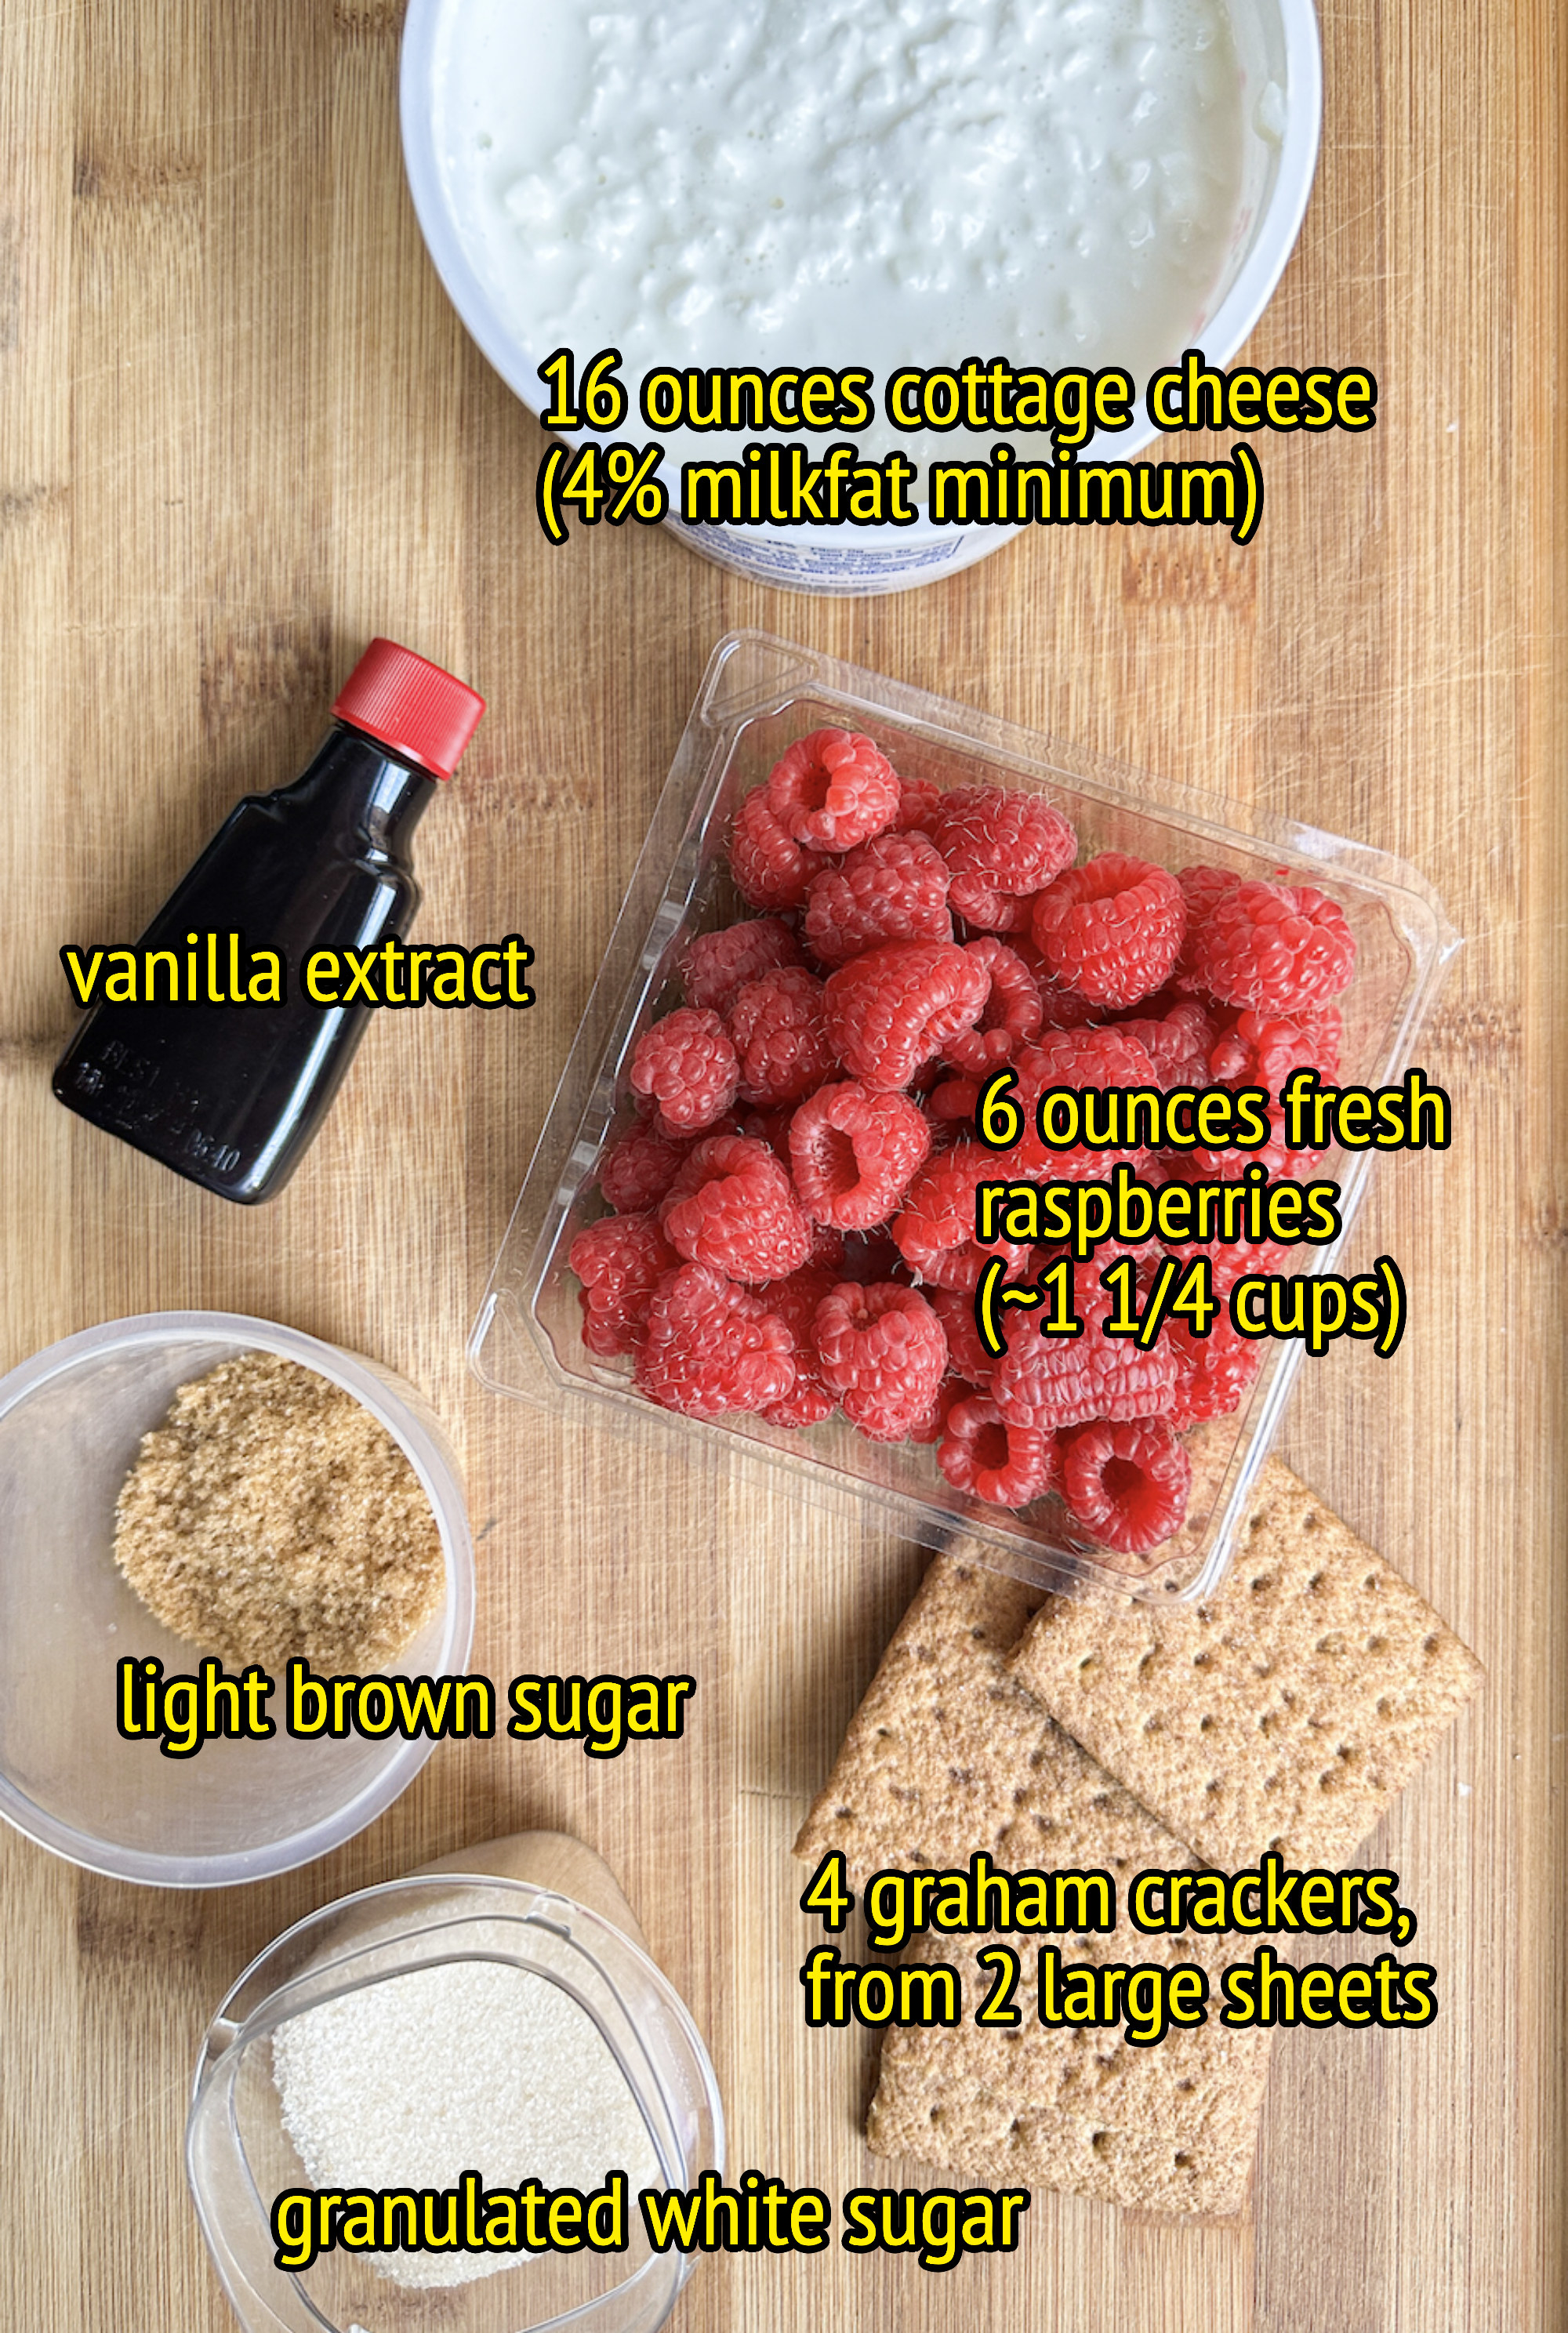 ingredients laid out on a cutting board: 16 ounces cottage cheese, 4% milkfat minimum, vanilla extract, 6 ounces fresh raspberries, light brown sugar, 4 graham cracker, granulated white sugar